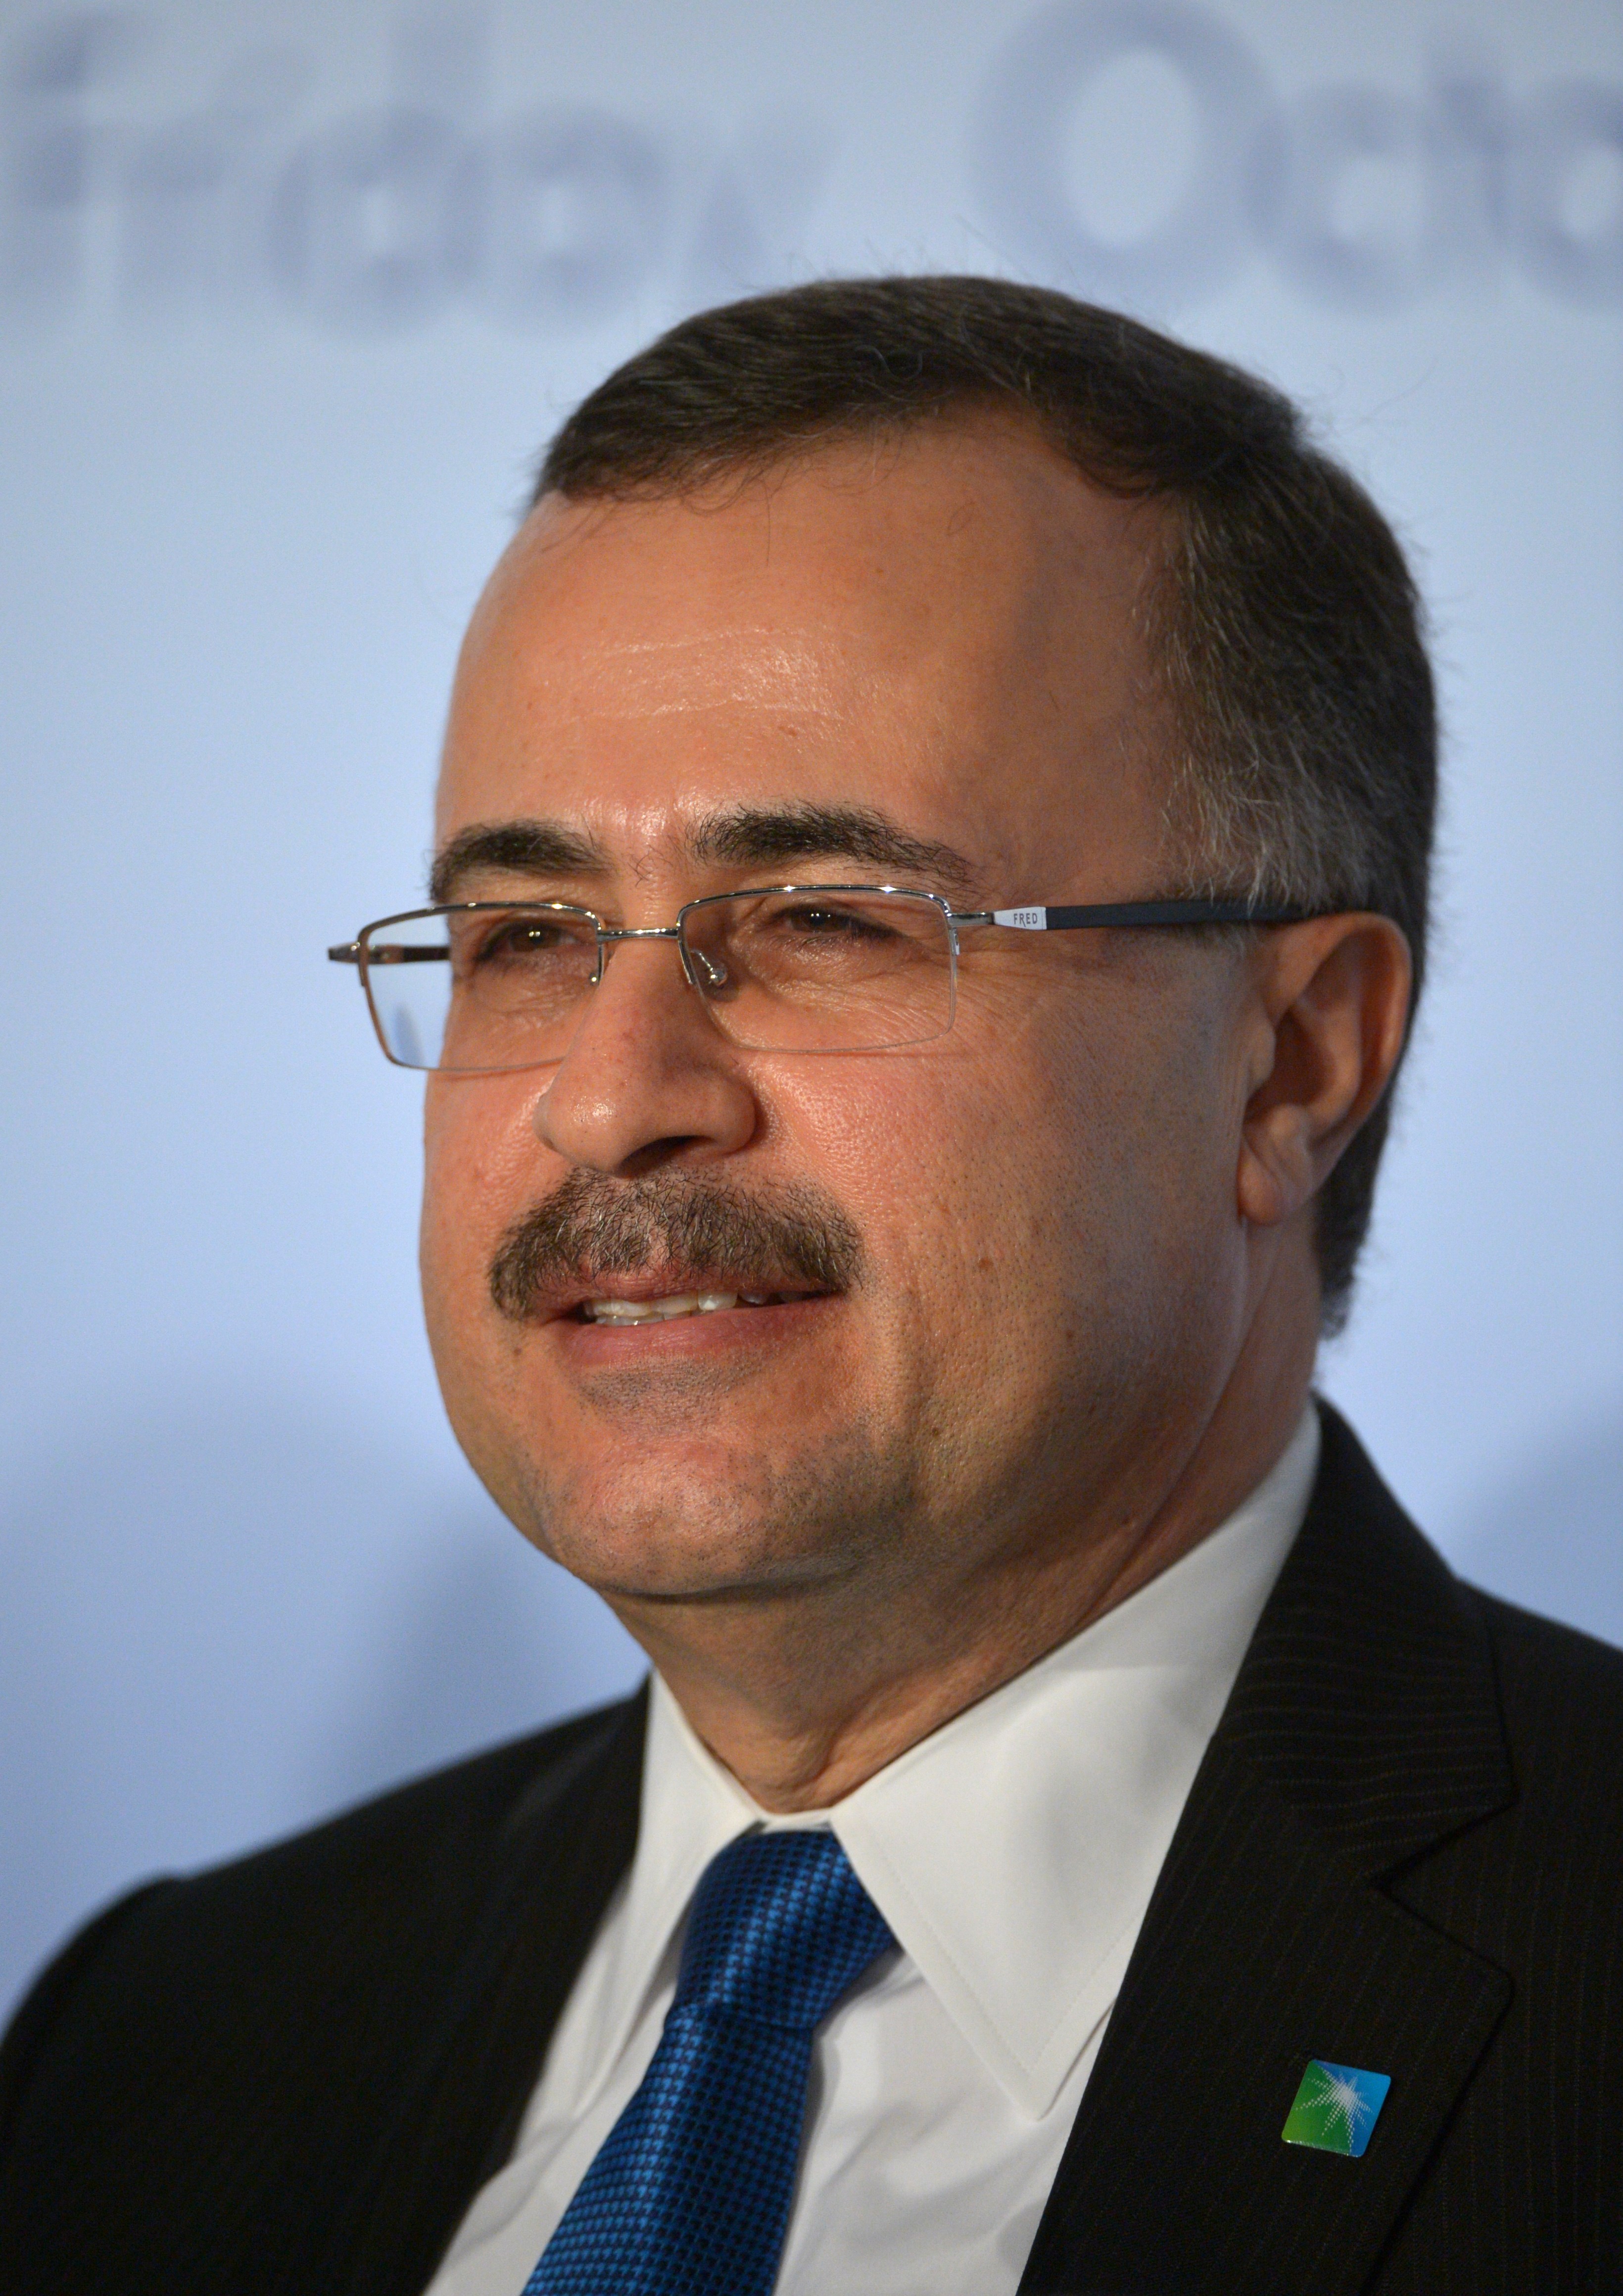 Saudi Aramco CEO Amin Nasser at a meeting of the Oil and Gas Climate Initiative (OGCI) in Paris on Oct. 16, 2015.